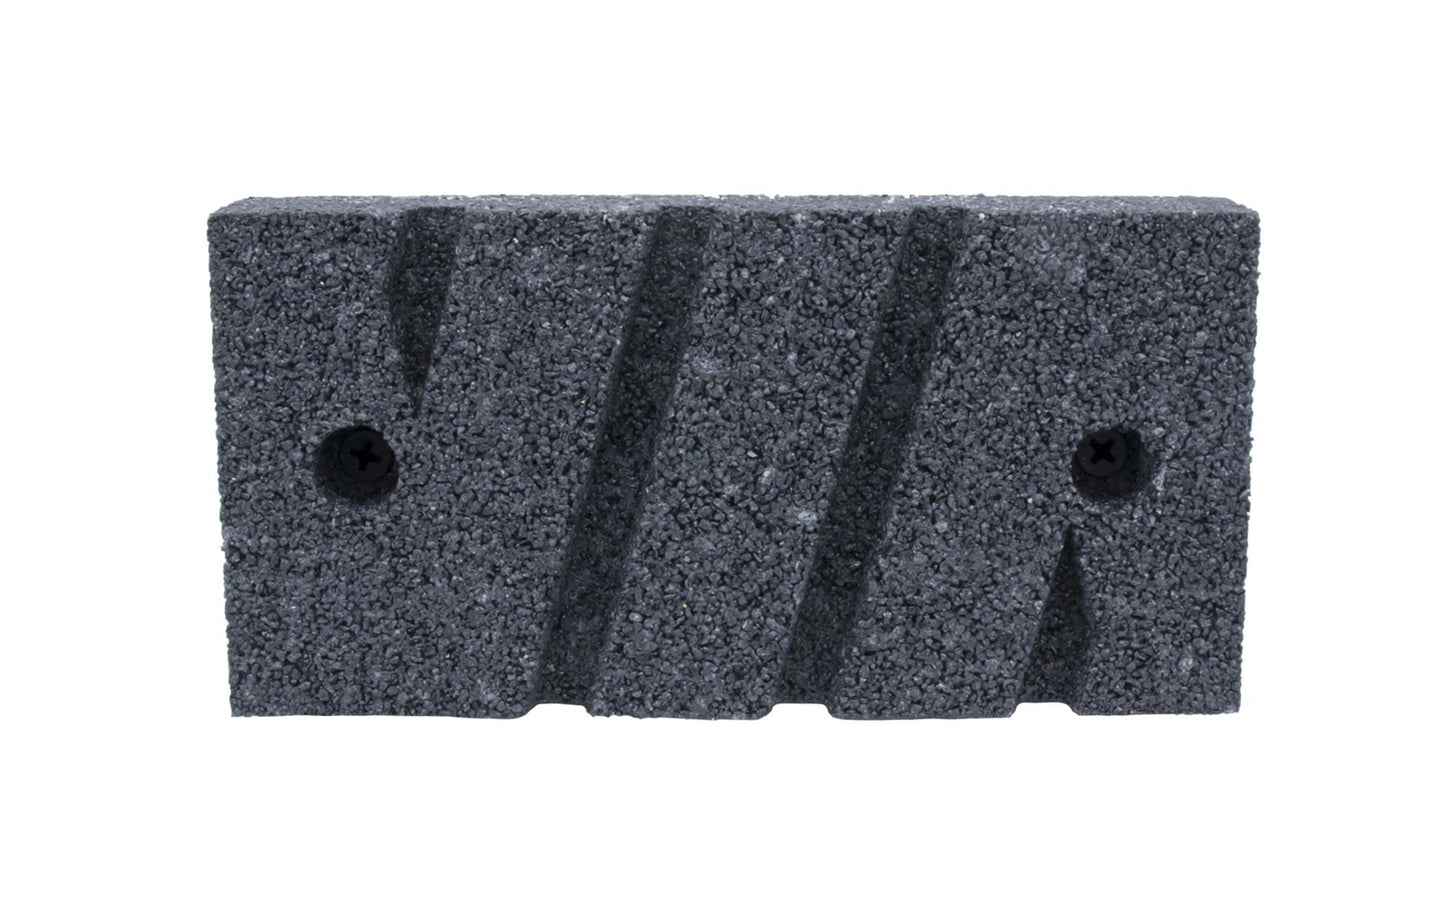 These Marshalltown Rub Bricks are the best Masonry tool for cleaning bricks as well as dressing down & removing form marks from concrete. Model No. 840 Rub Brick 6" x 3" x 1". Model No. 841 Rub Brick 8" x 3-1/2" x 1-1/2" Made in USA.